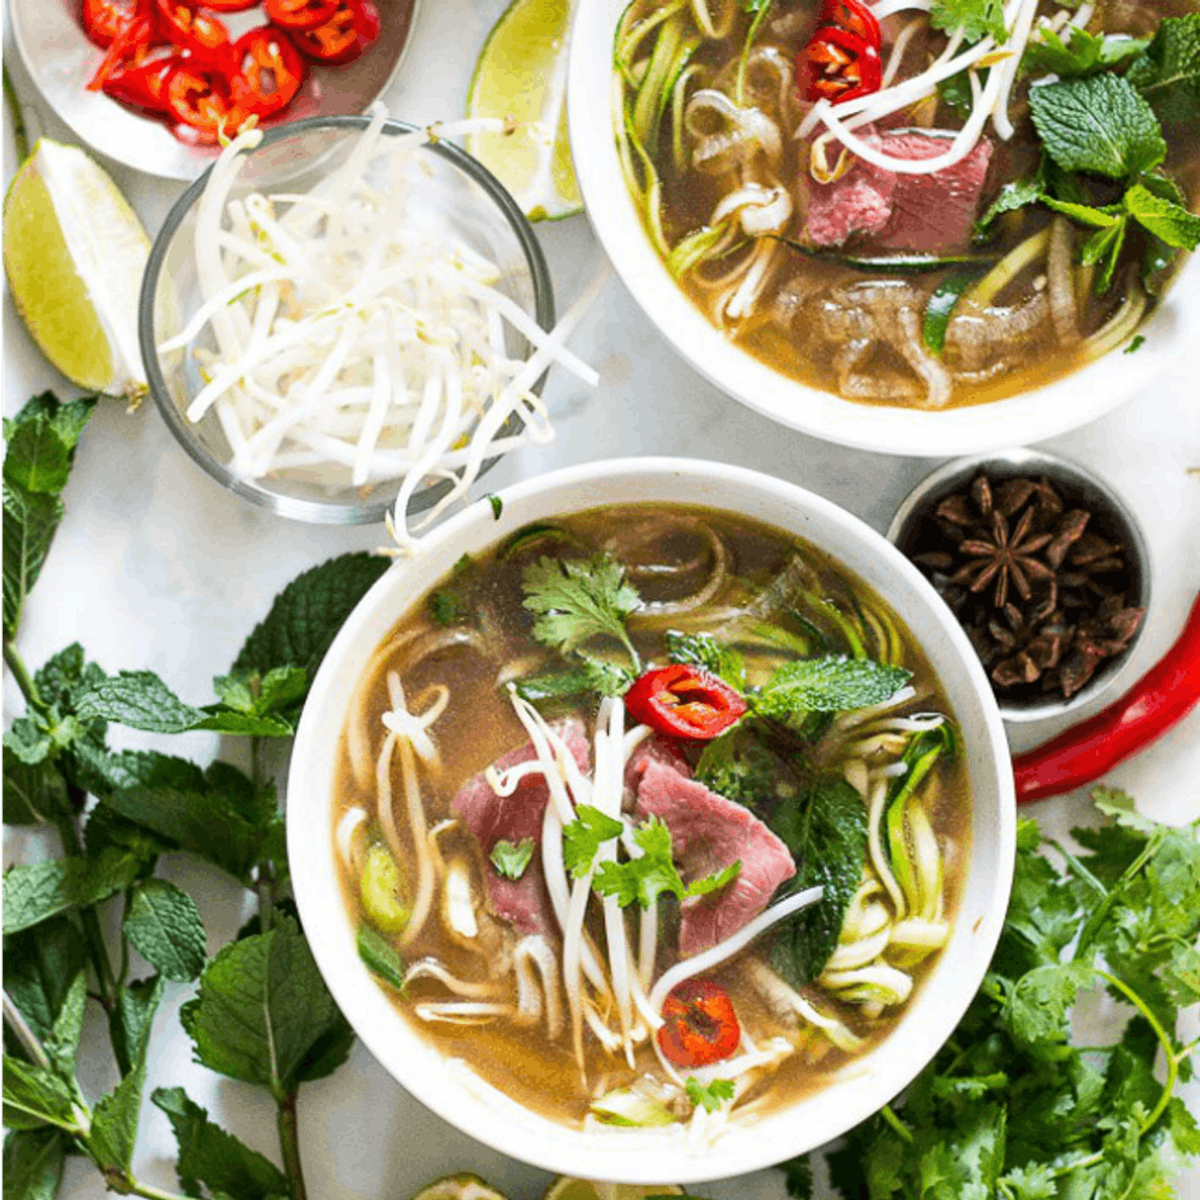 14 Hot and Broth-y Soups to Soothe What’s Ailing You